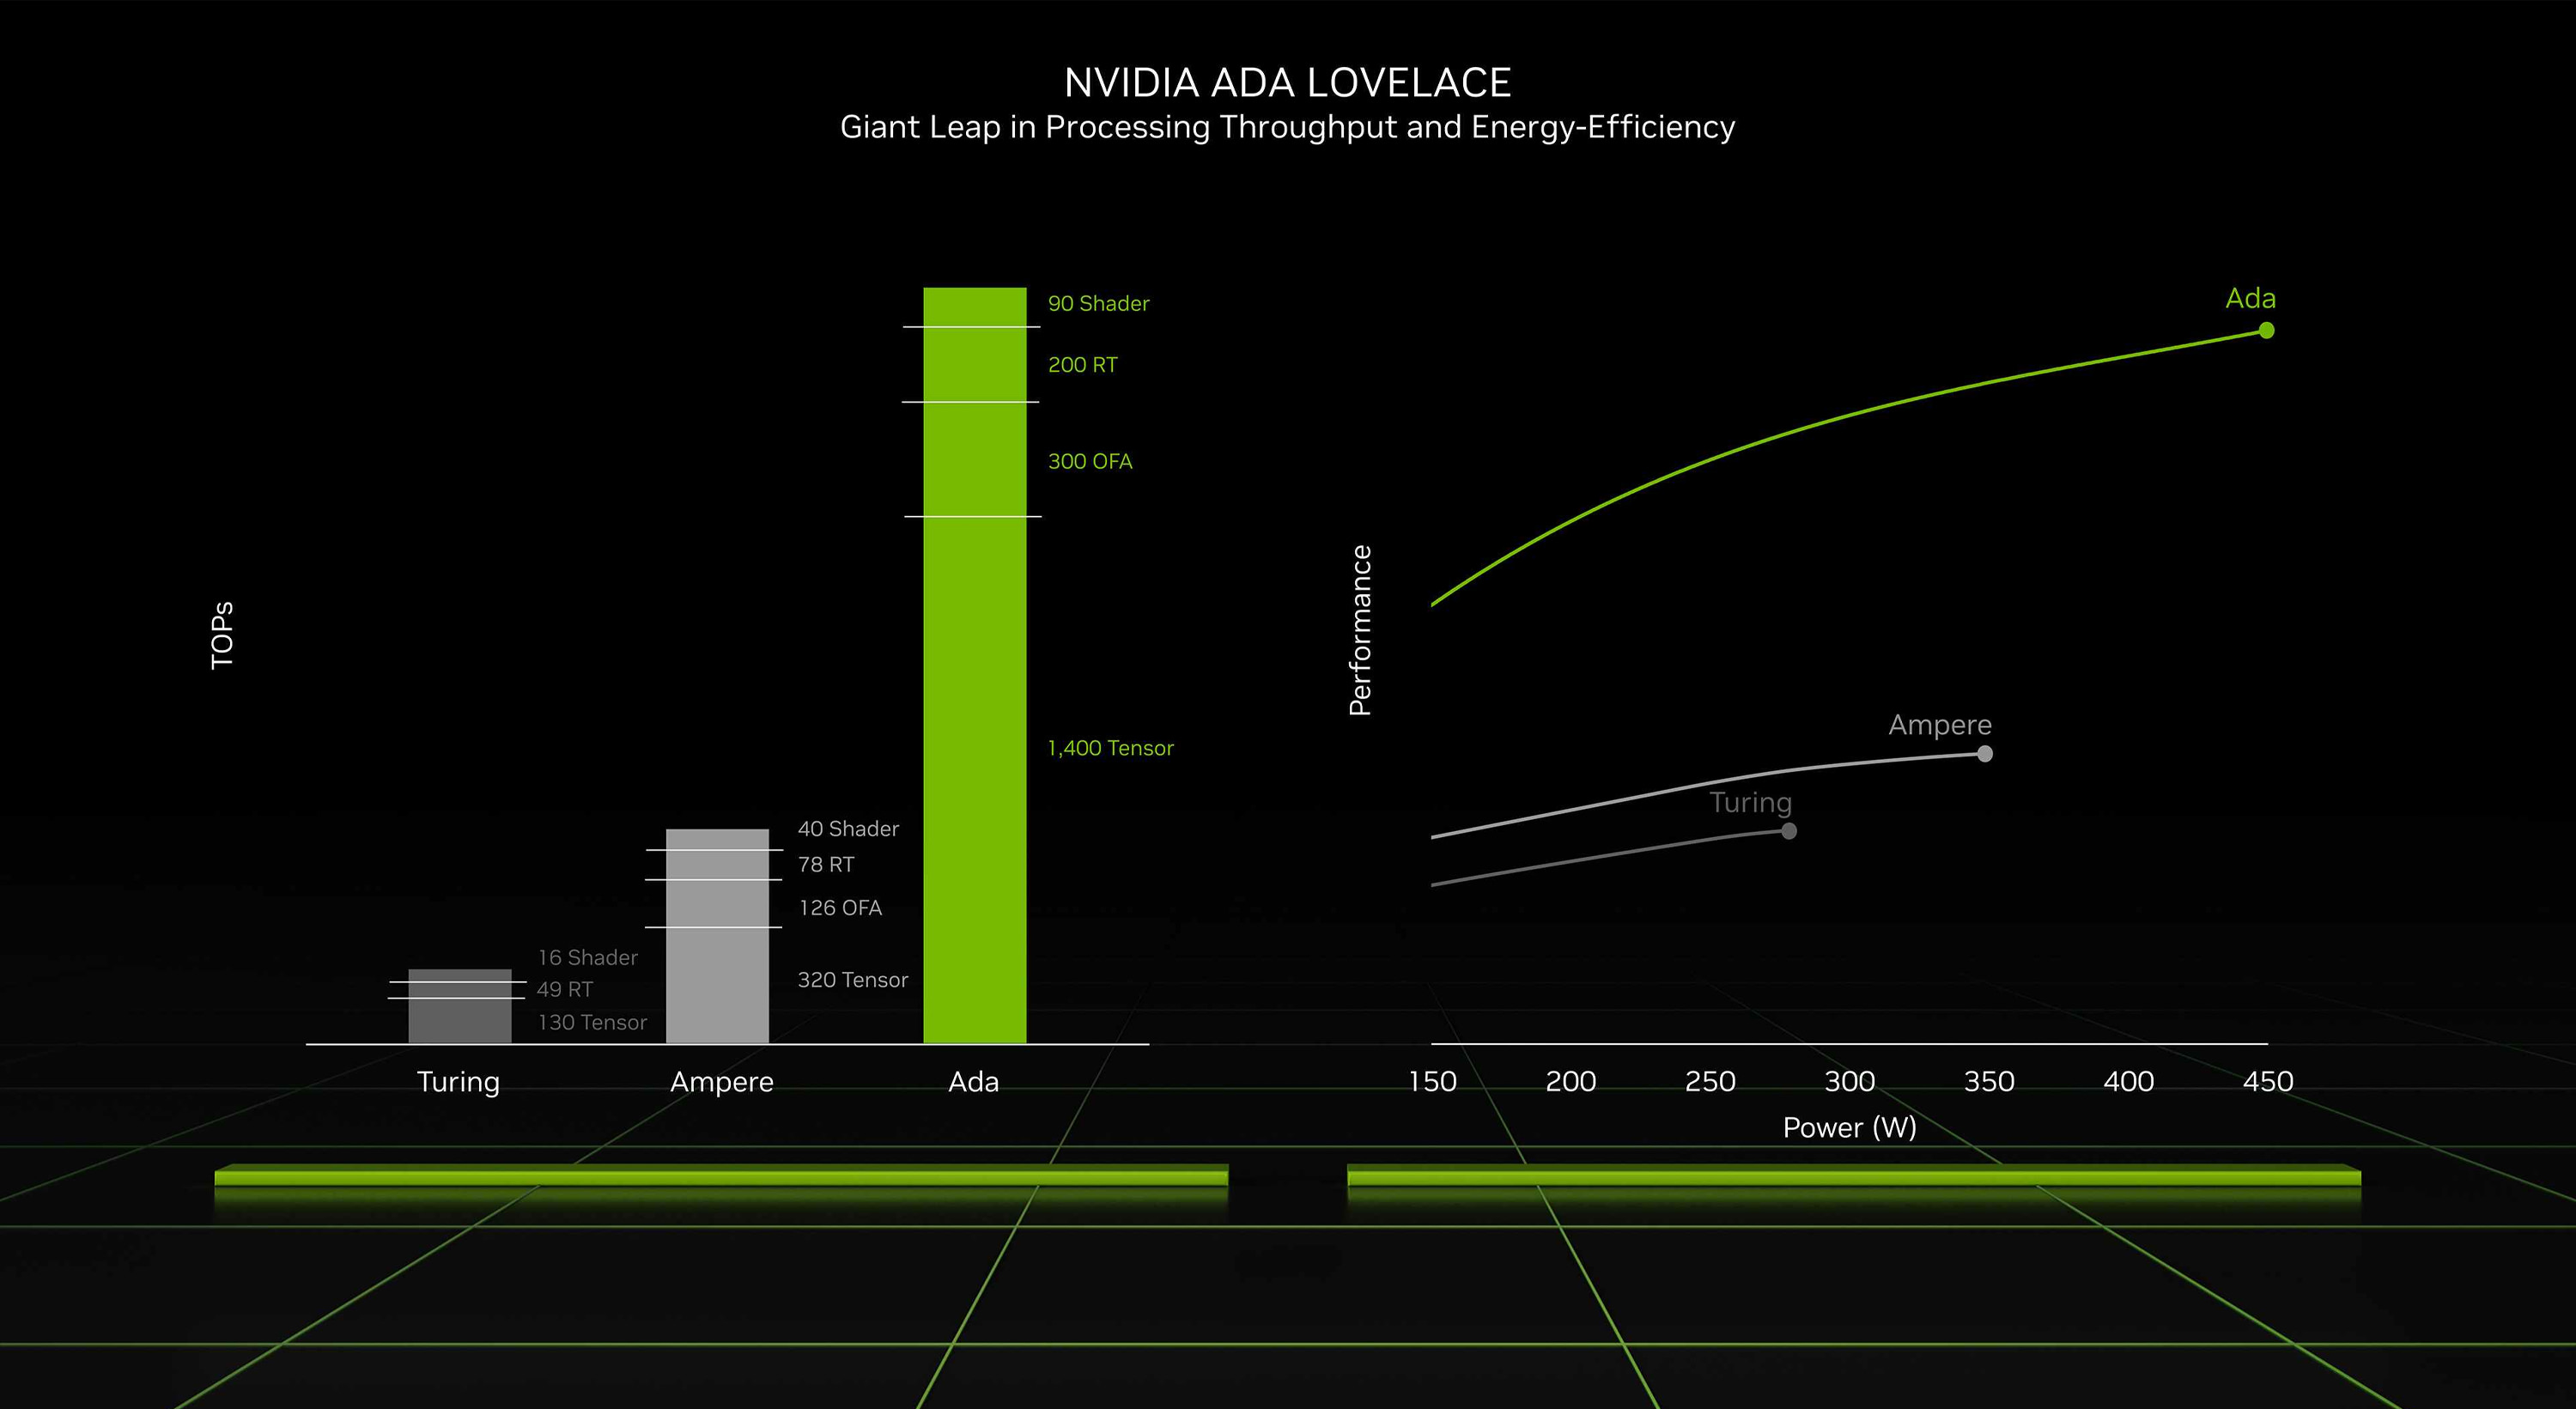 Energy efficiency in Nvidia's Ada Lovelace architecture